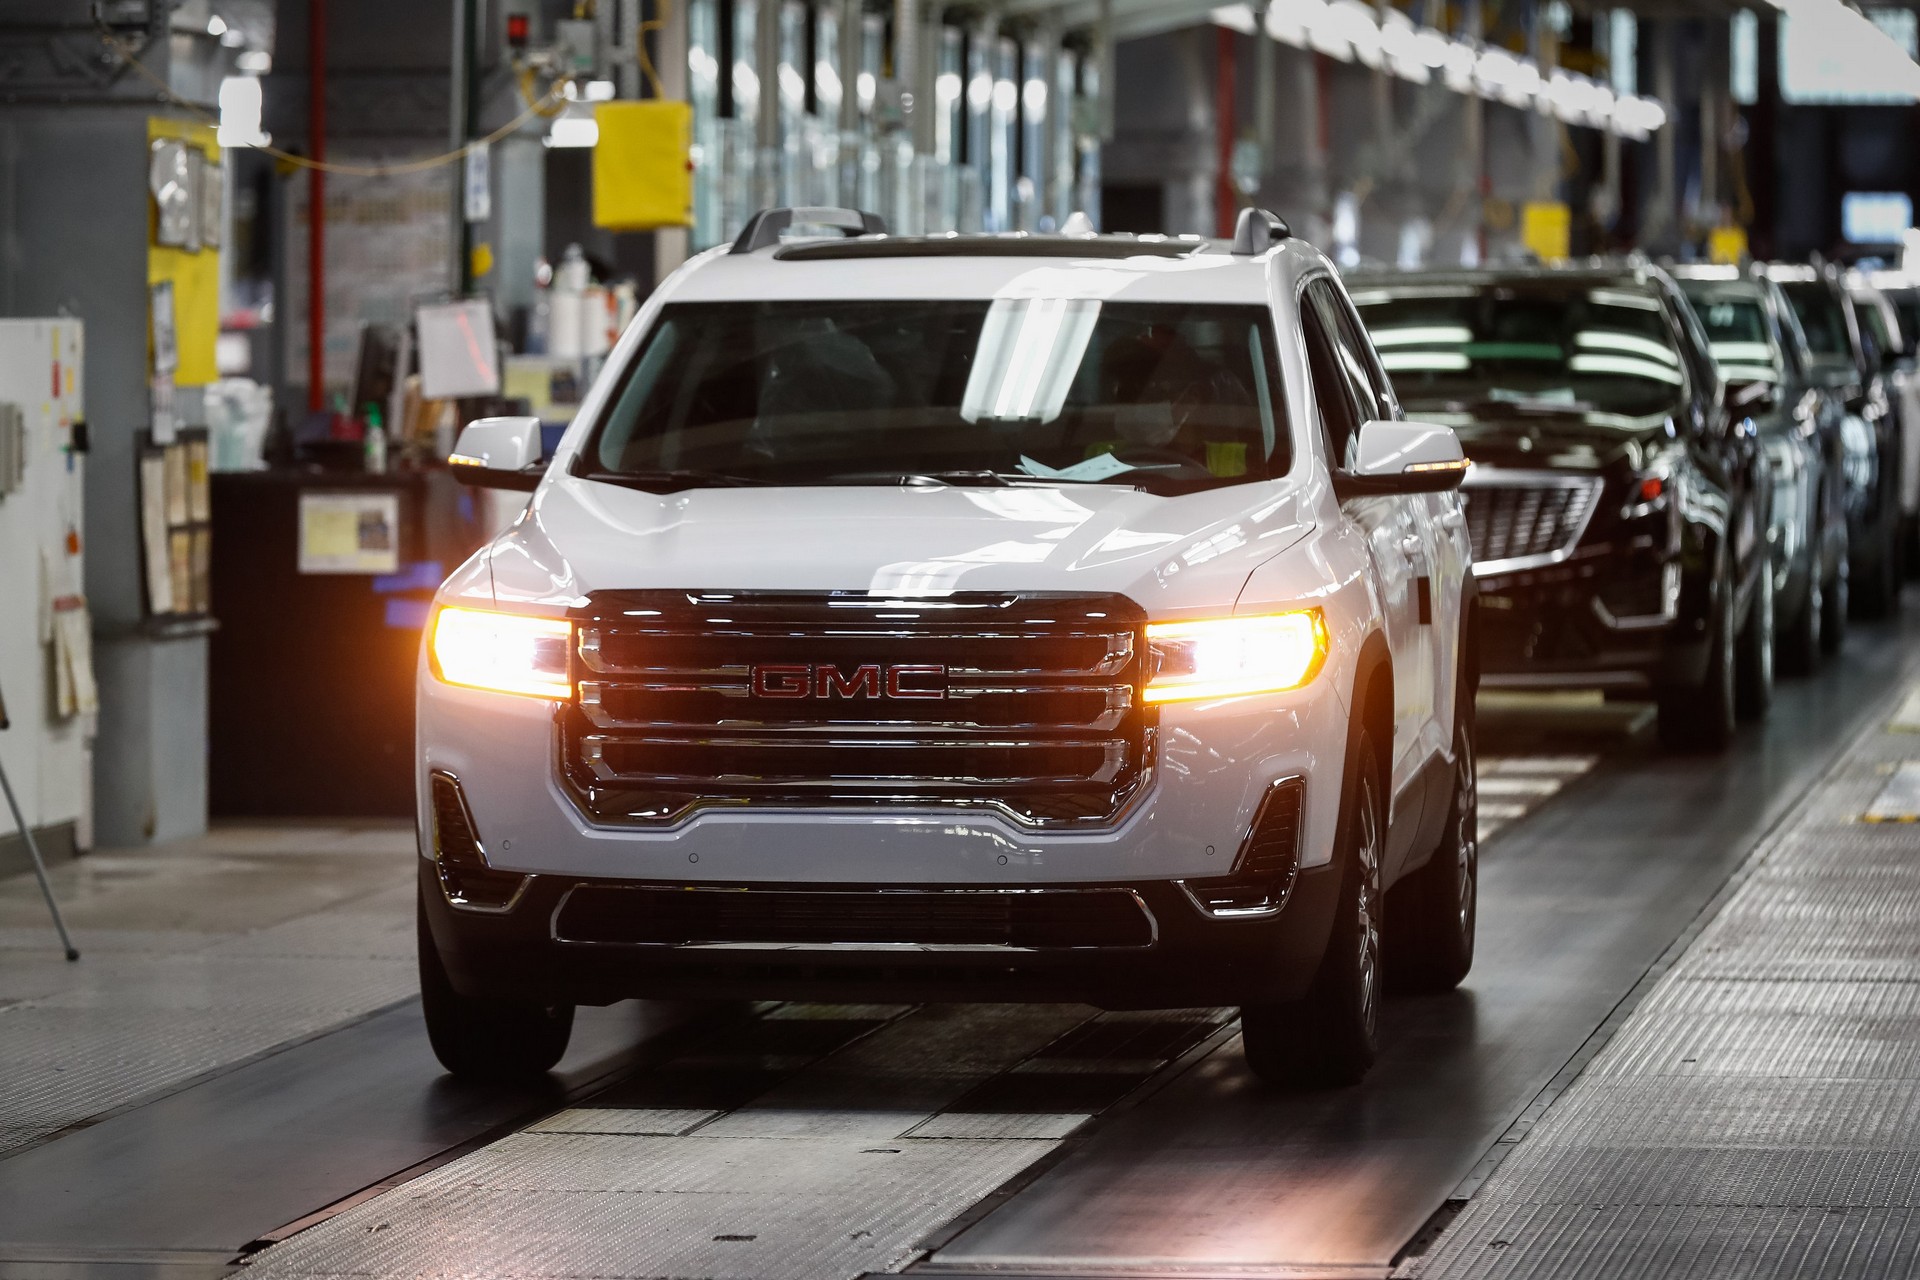 GM Investing $2 Billion To Build The Cadillac Lyriq In Tennessee ...